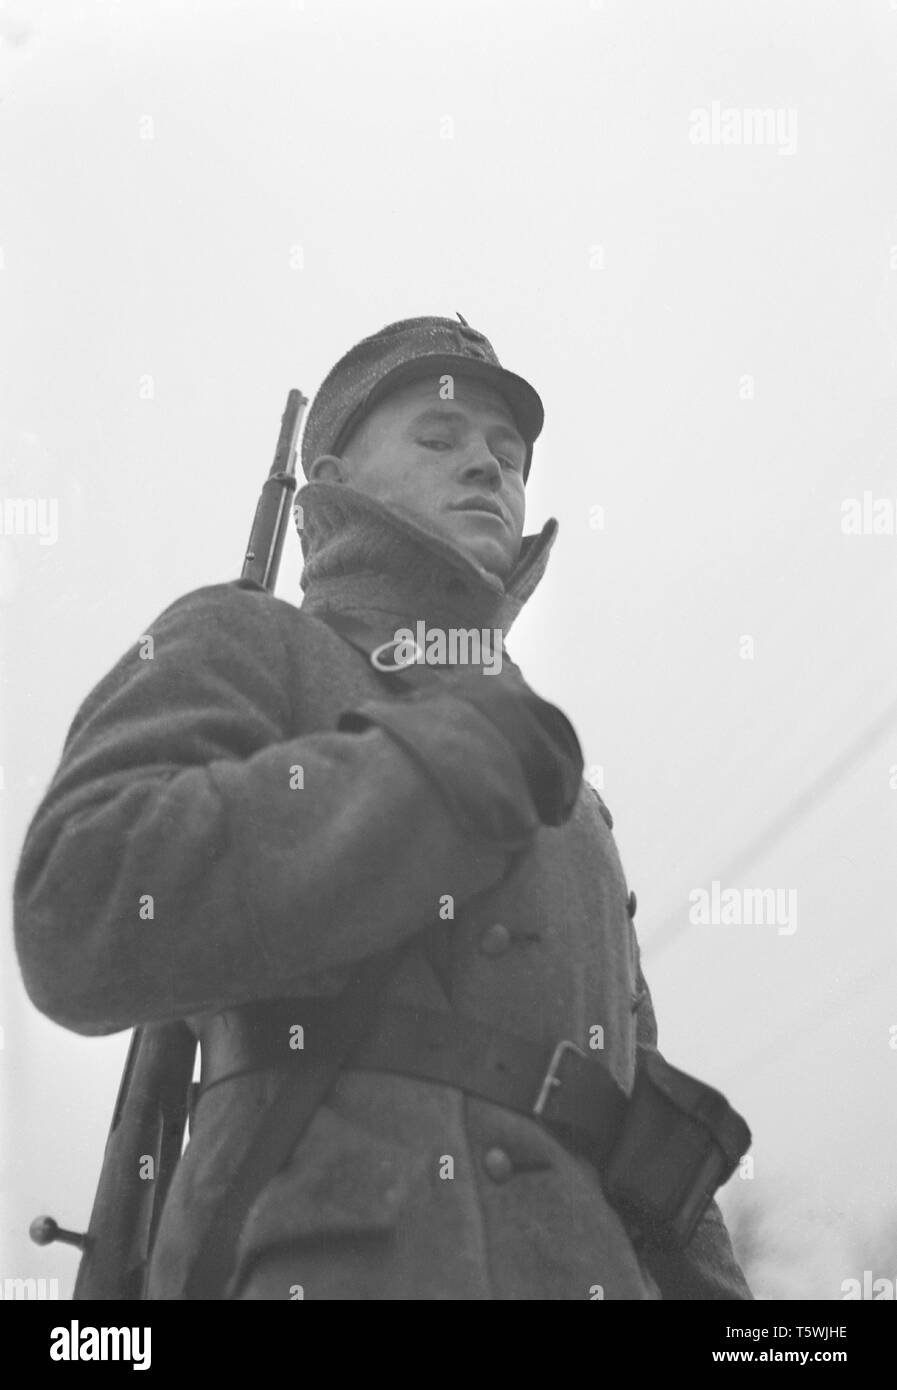 The Winter War. A military conflict between the Soviet union and Finland. It began with a Soviet invasion on november 1939 when Soviet infantery crossed the border on the Karelian Isthmus. About 9500 Swedish volunteer soldiers participated in the war. Here at the Karelian Isthmus  a portrait of a Finnish soldier. January 1940. Photo Kristoffersson ref 99-5 Stock Photo